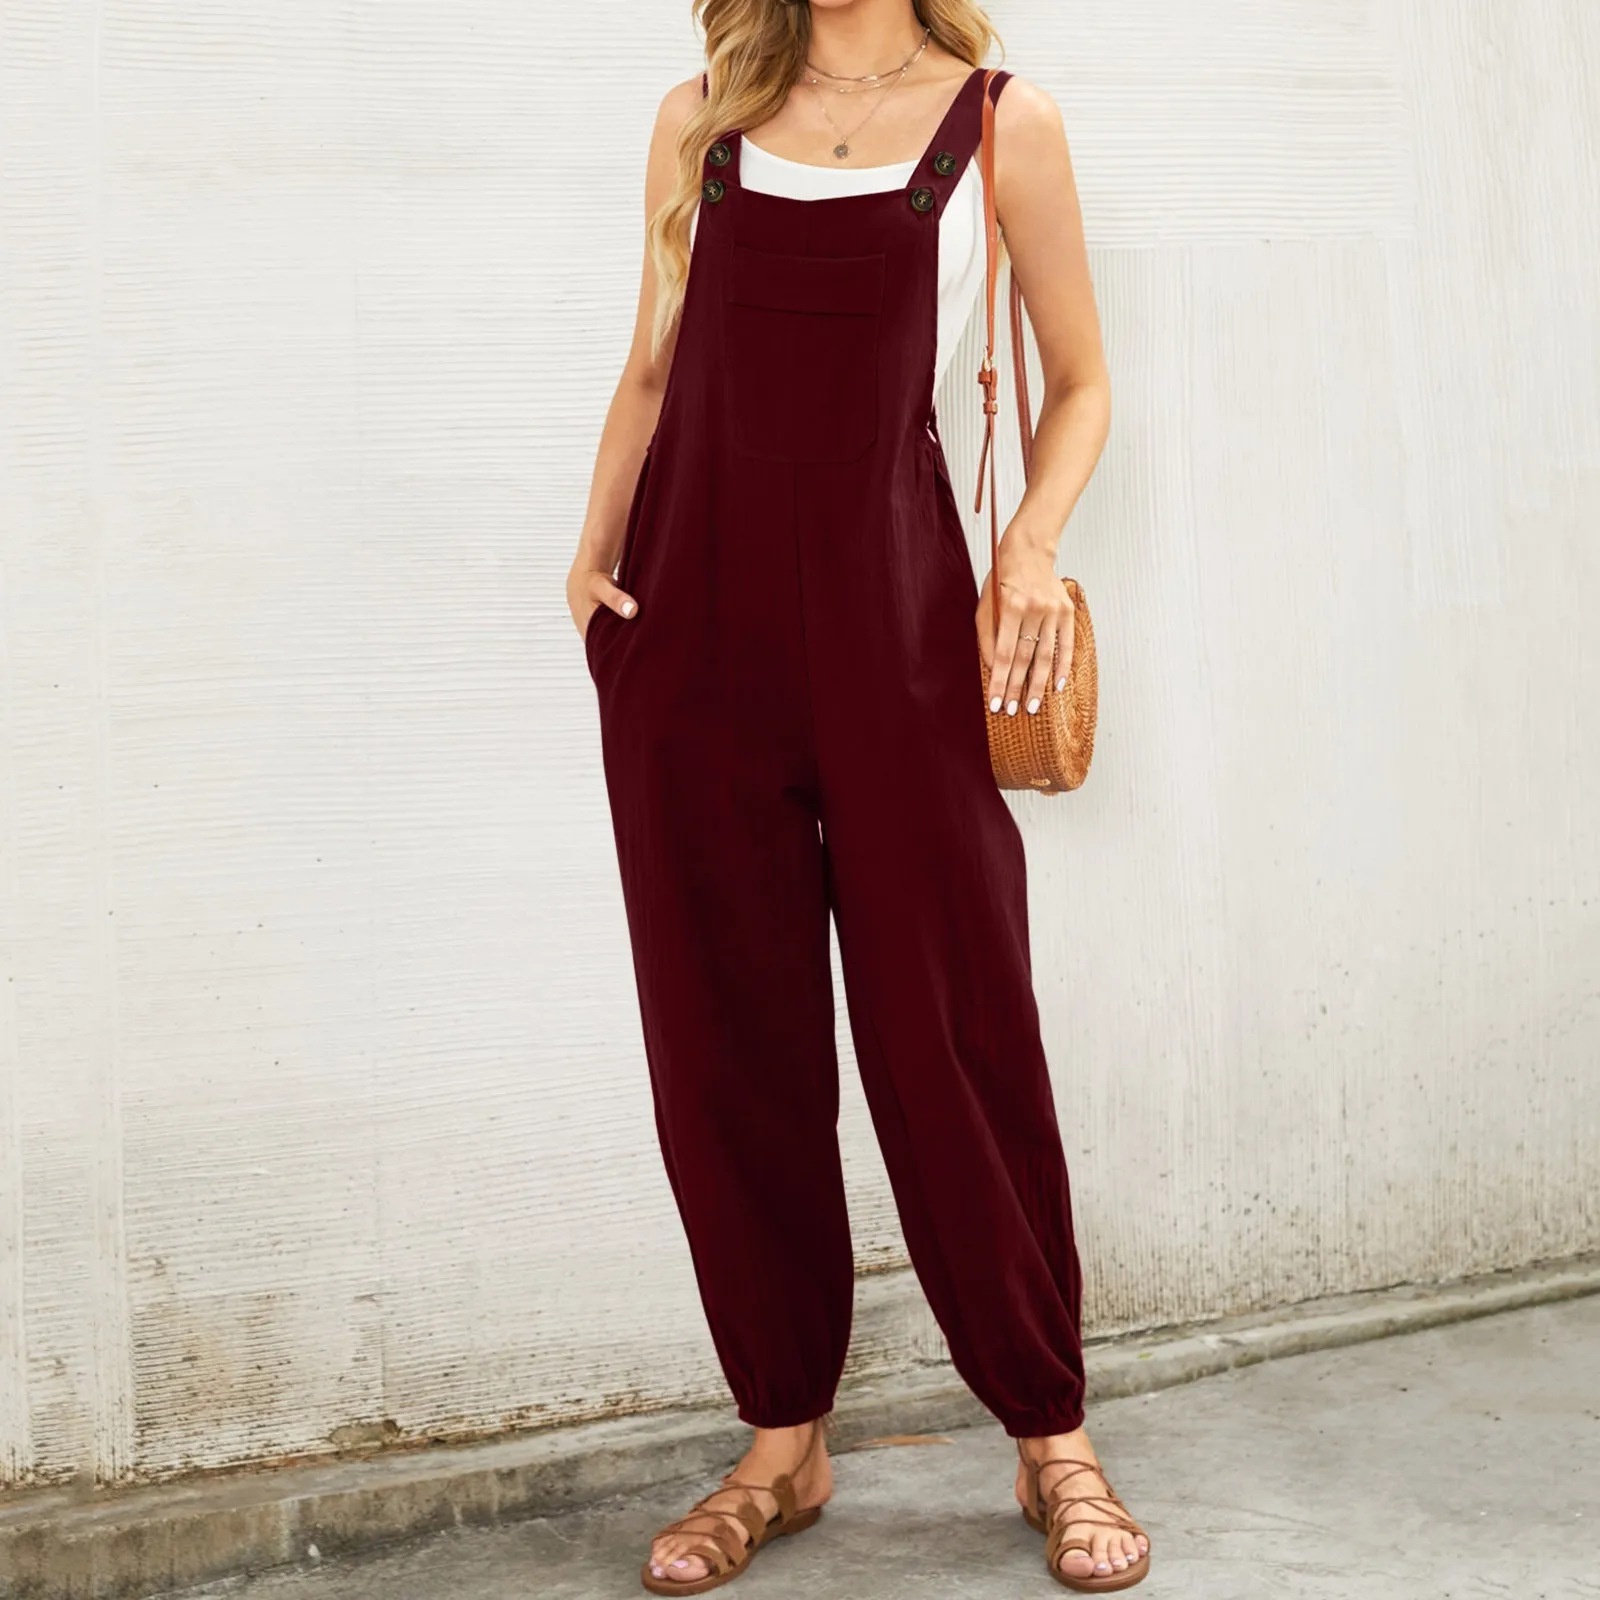 

Plus Size Autumn Women Fashion Loose Casual Overalls Cotton Linen Rompers Long Jumpsuits Solid Color Strappy Pockets Dungarees